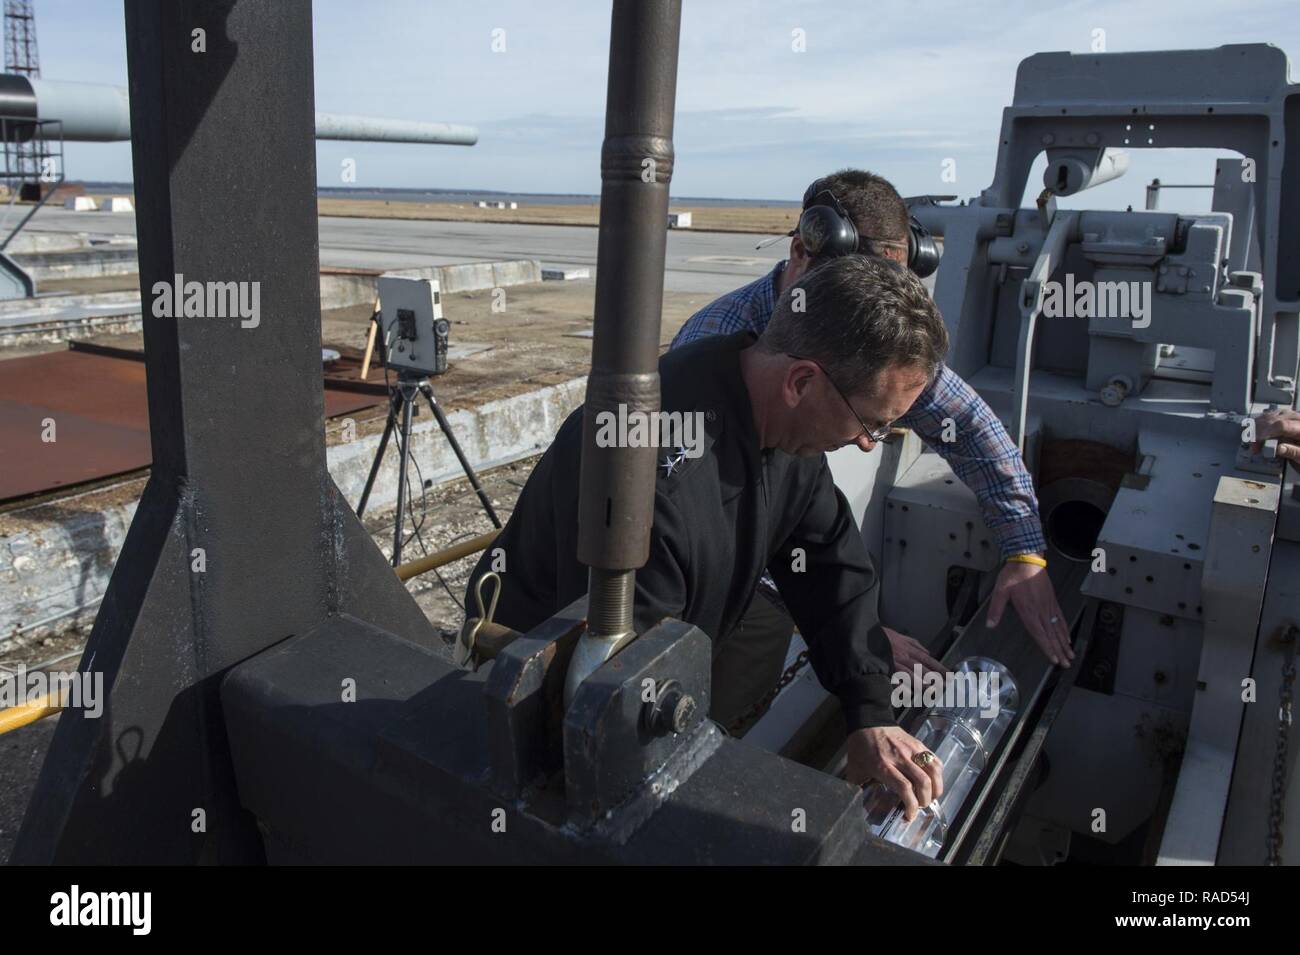 DAHLGREN (Jan. 12, 2017) Rear Adm. David Hahn, chief of naval research, assists with loading a Hyper Velocity Projectile (HVP) into a traditional powder gun during a visit to the Naval Surface Warfare Center, Dahlgren Division. The HVP is a next-generation, low drag, guided projectile capable of completing multiple missions for gun systems such as the Navy five-Inch guns and future railguns. Stock Photo